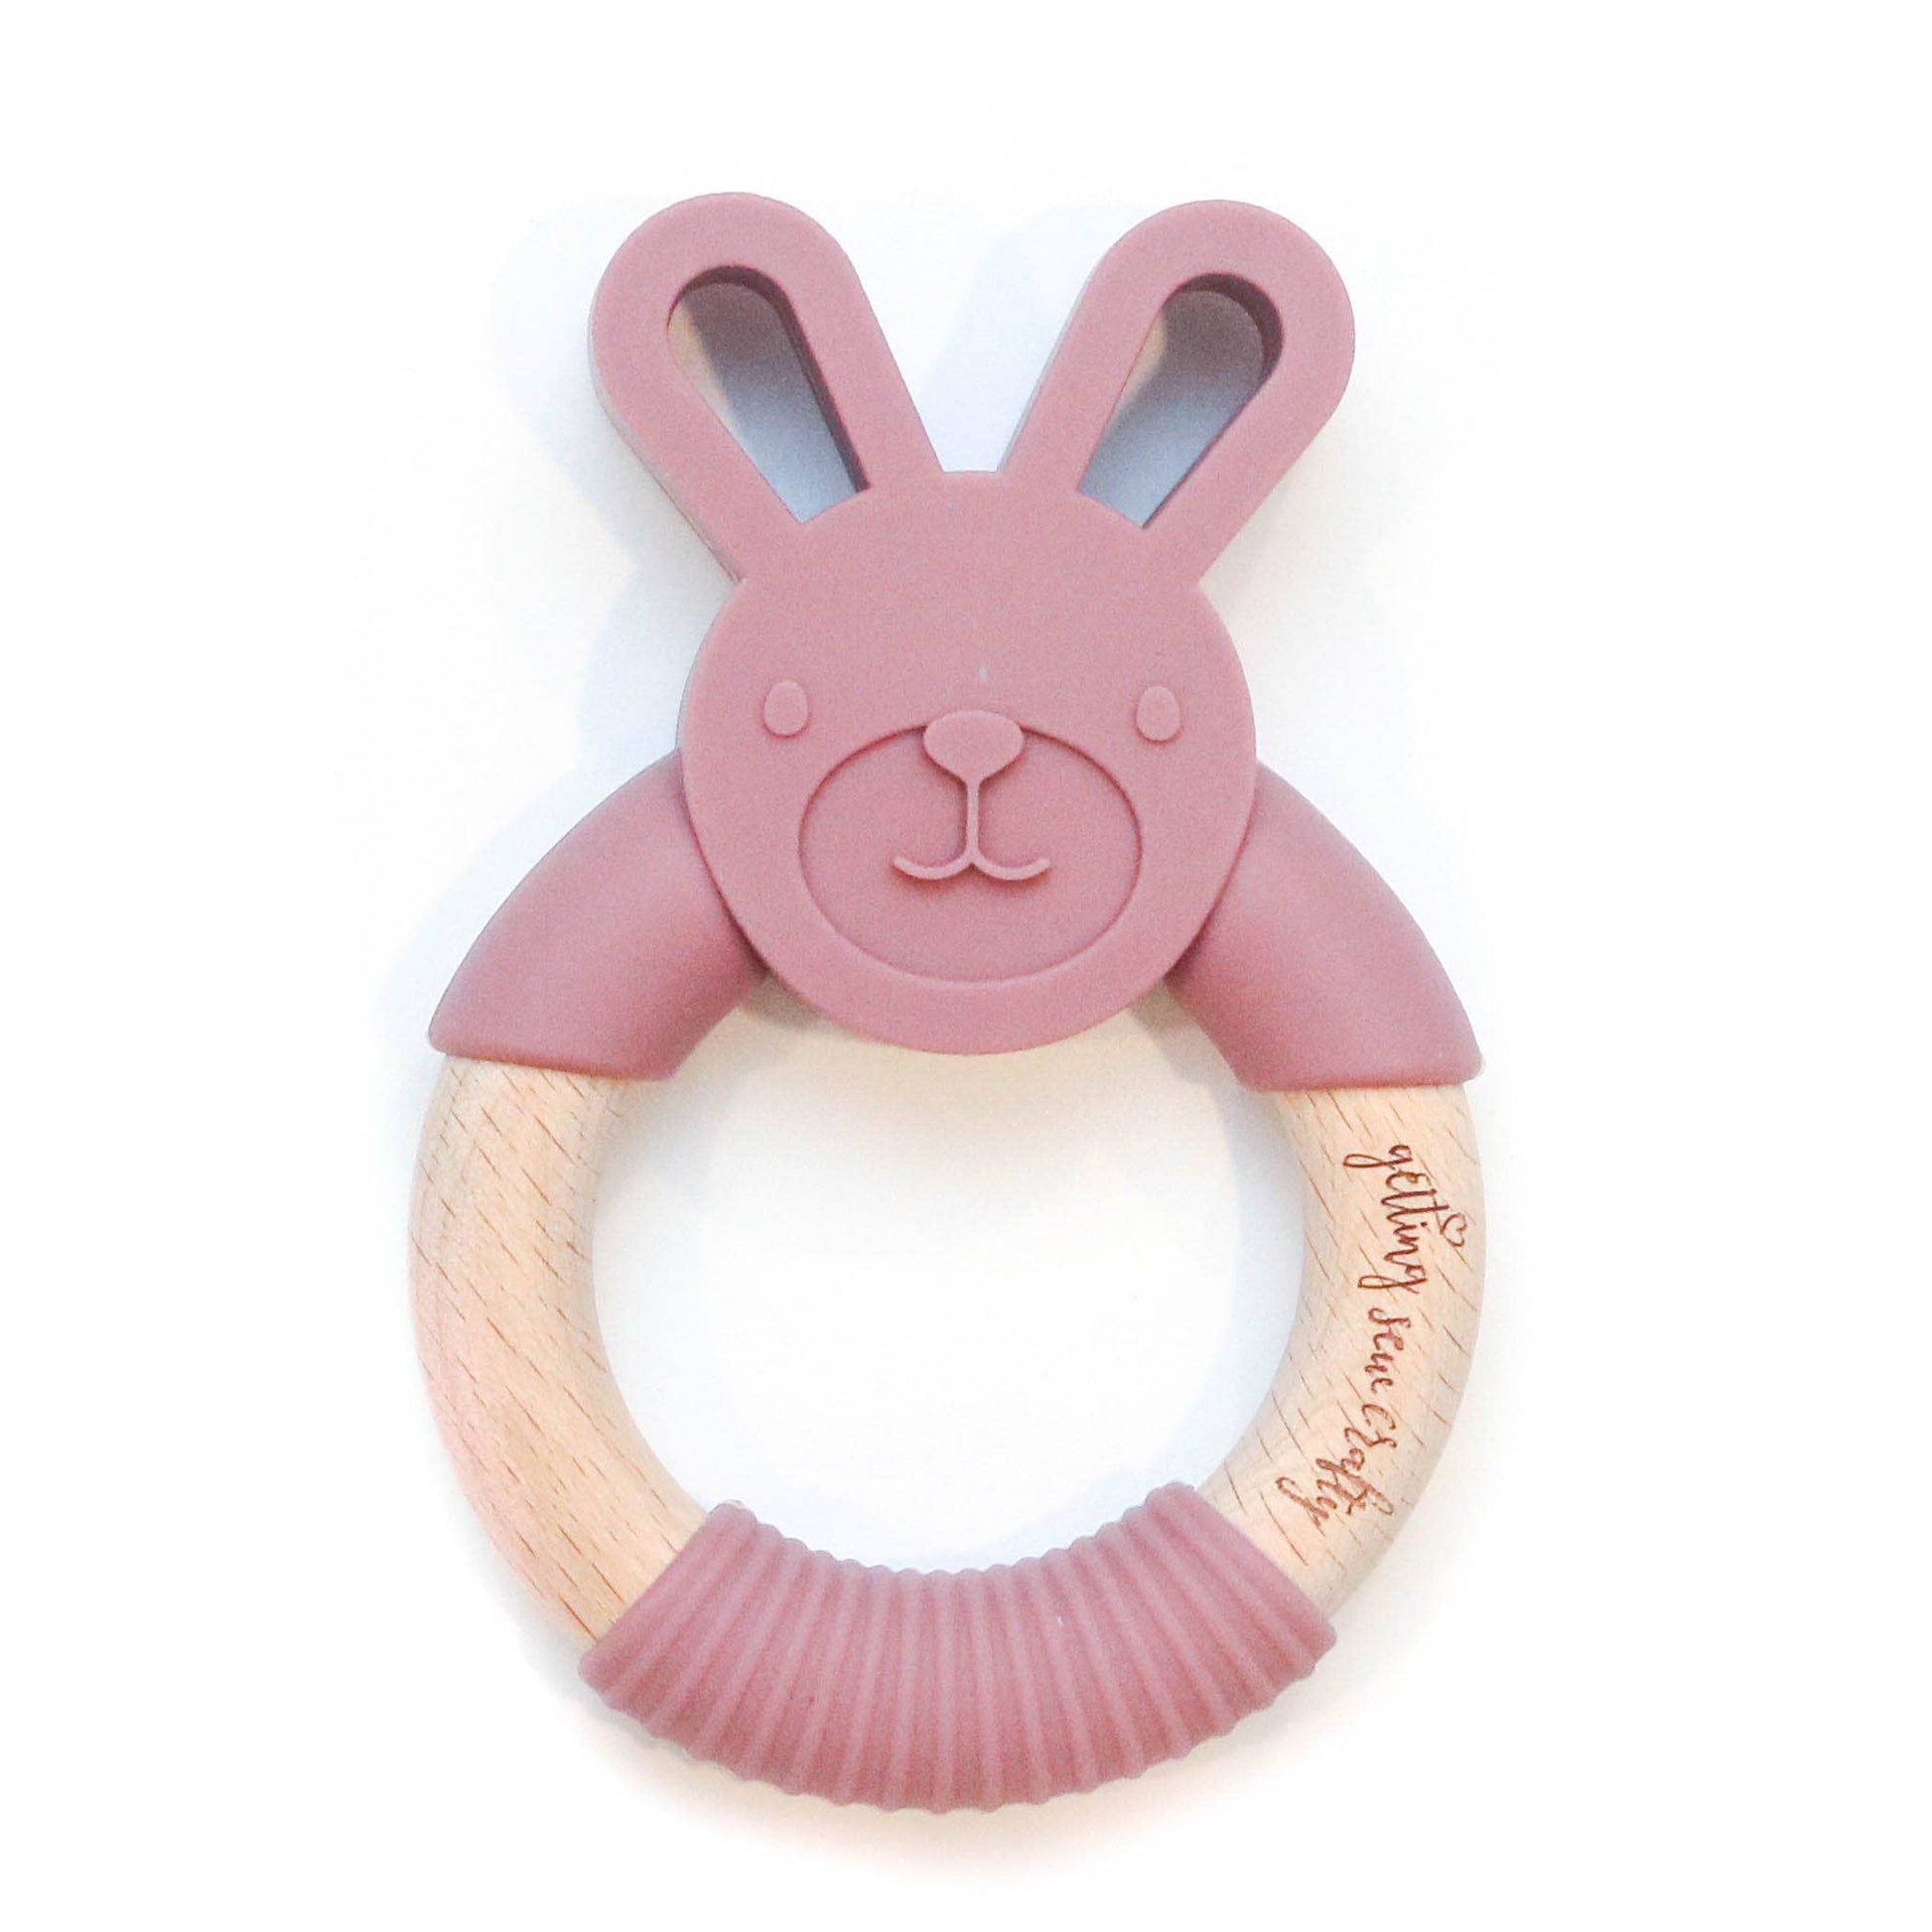 Silicone and Wood Teether Ring 